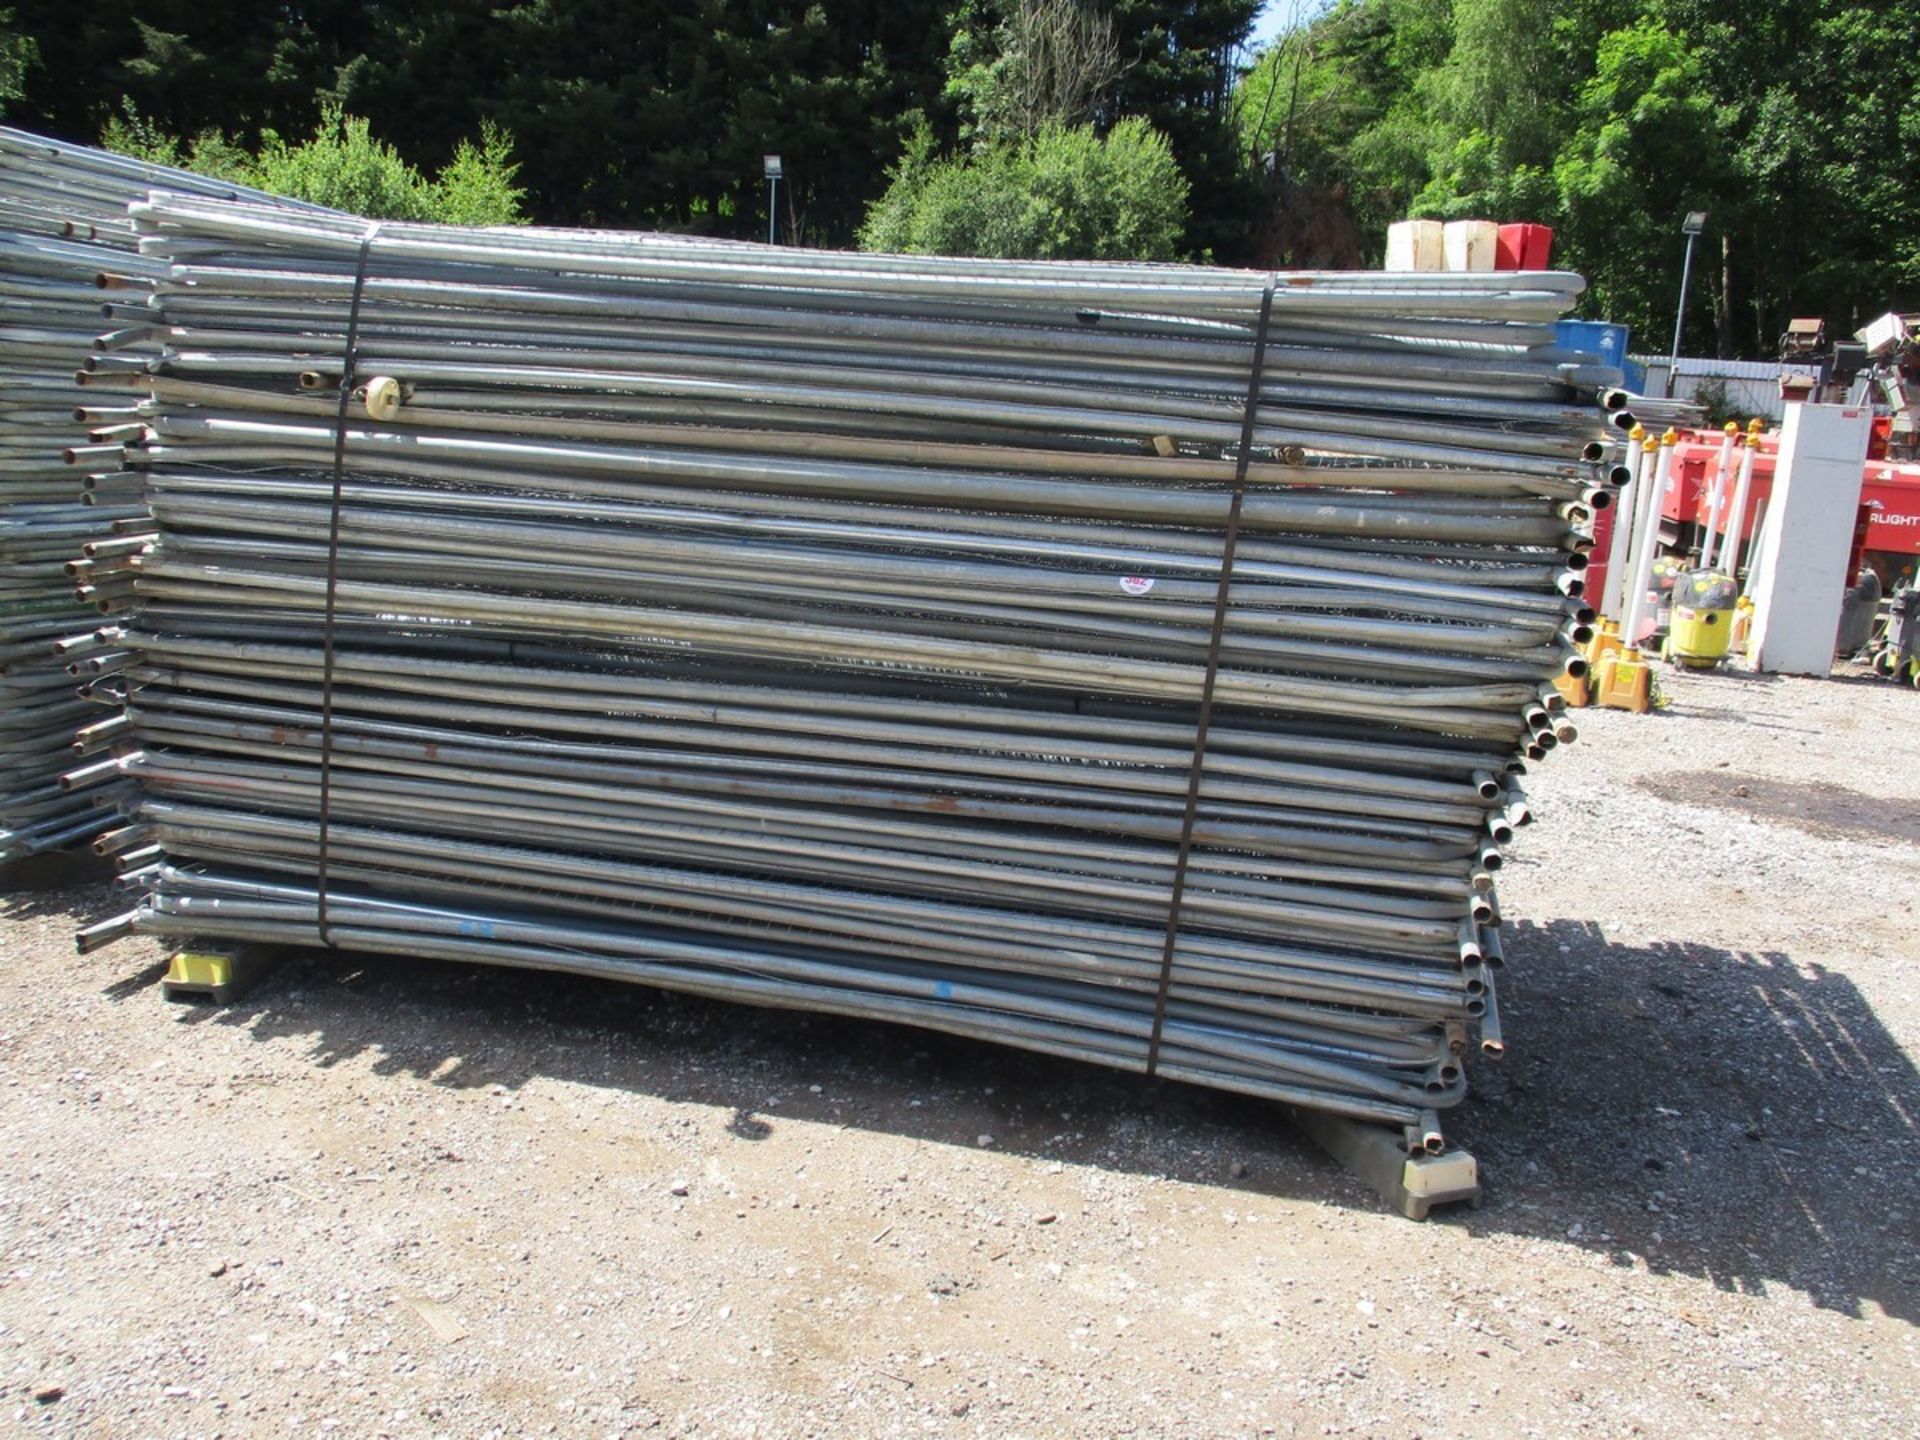 APPROX 60 HERRAS FENCE PANELS